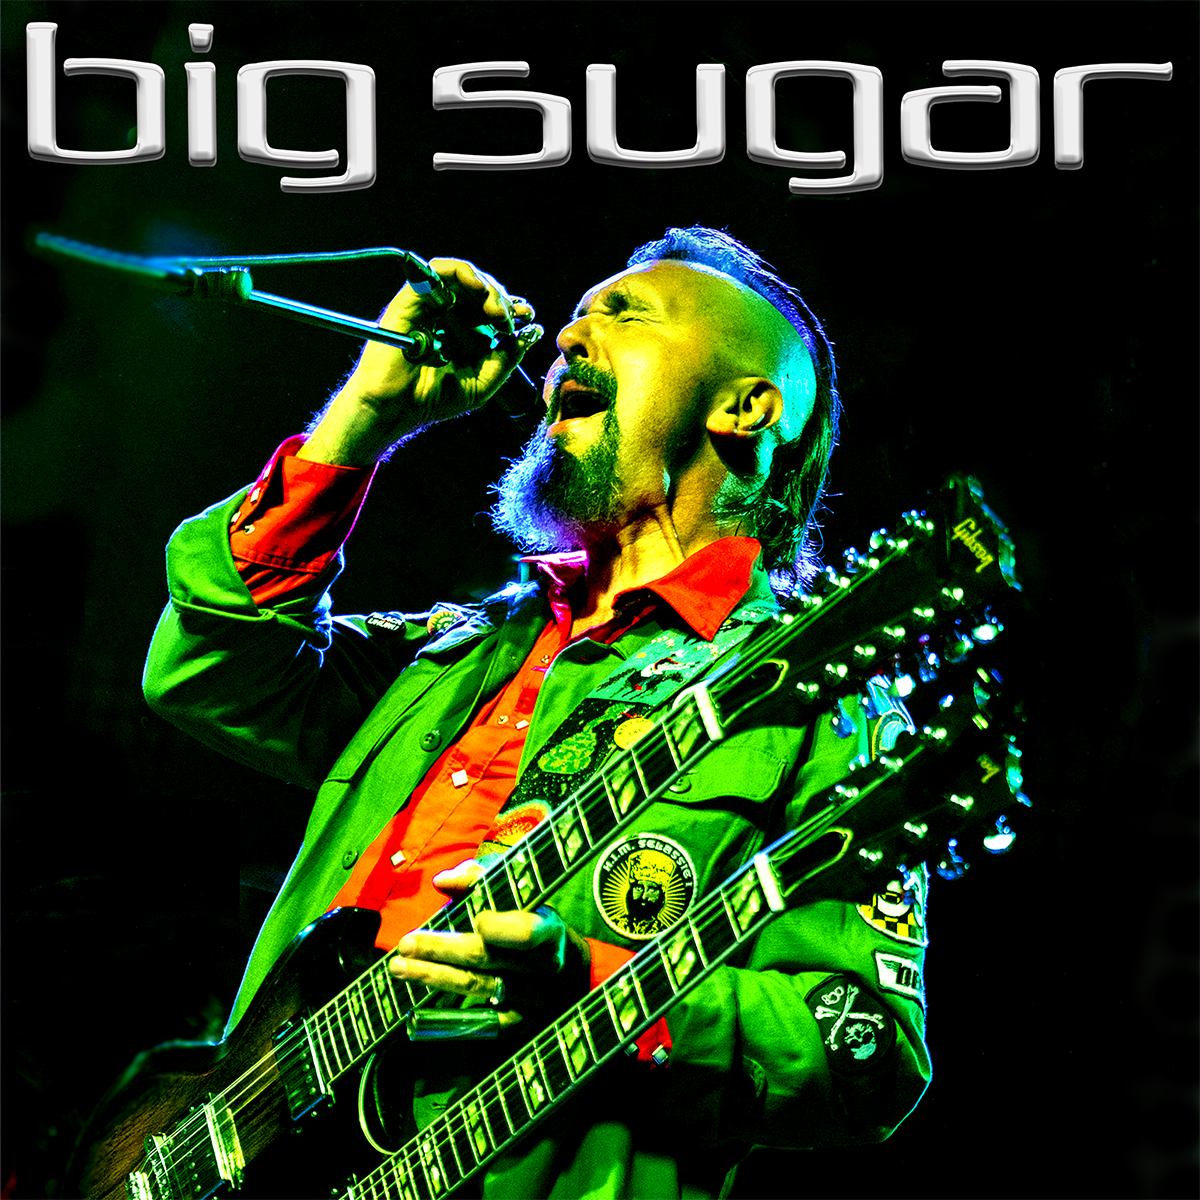 Big Sugar Revisits Classic Release With New Tour And Band Lineup￼